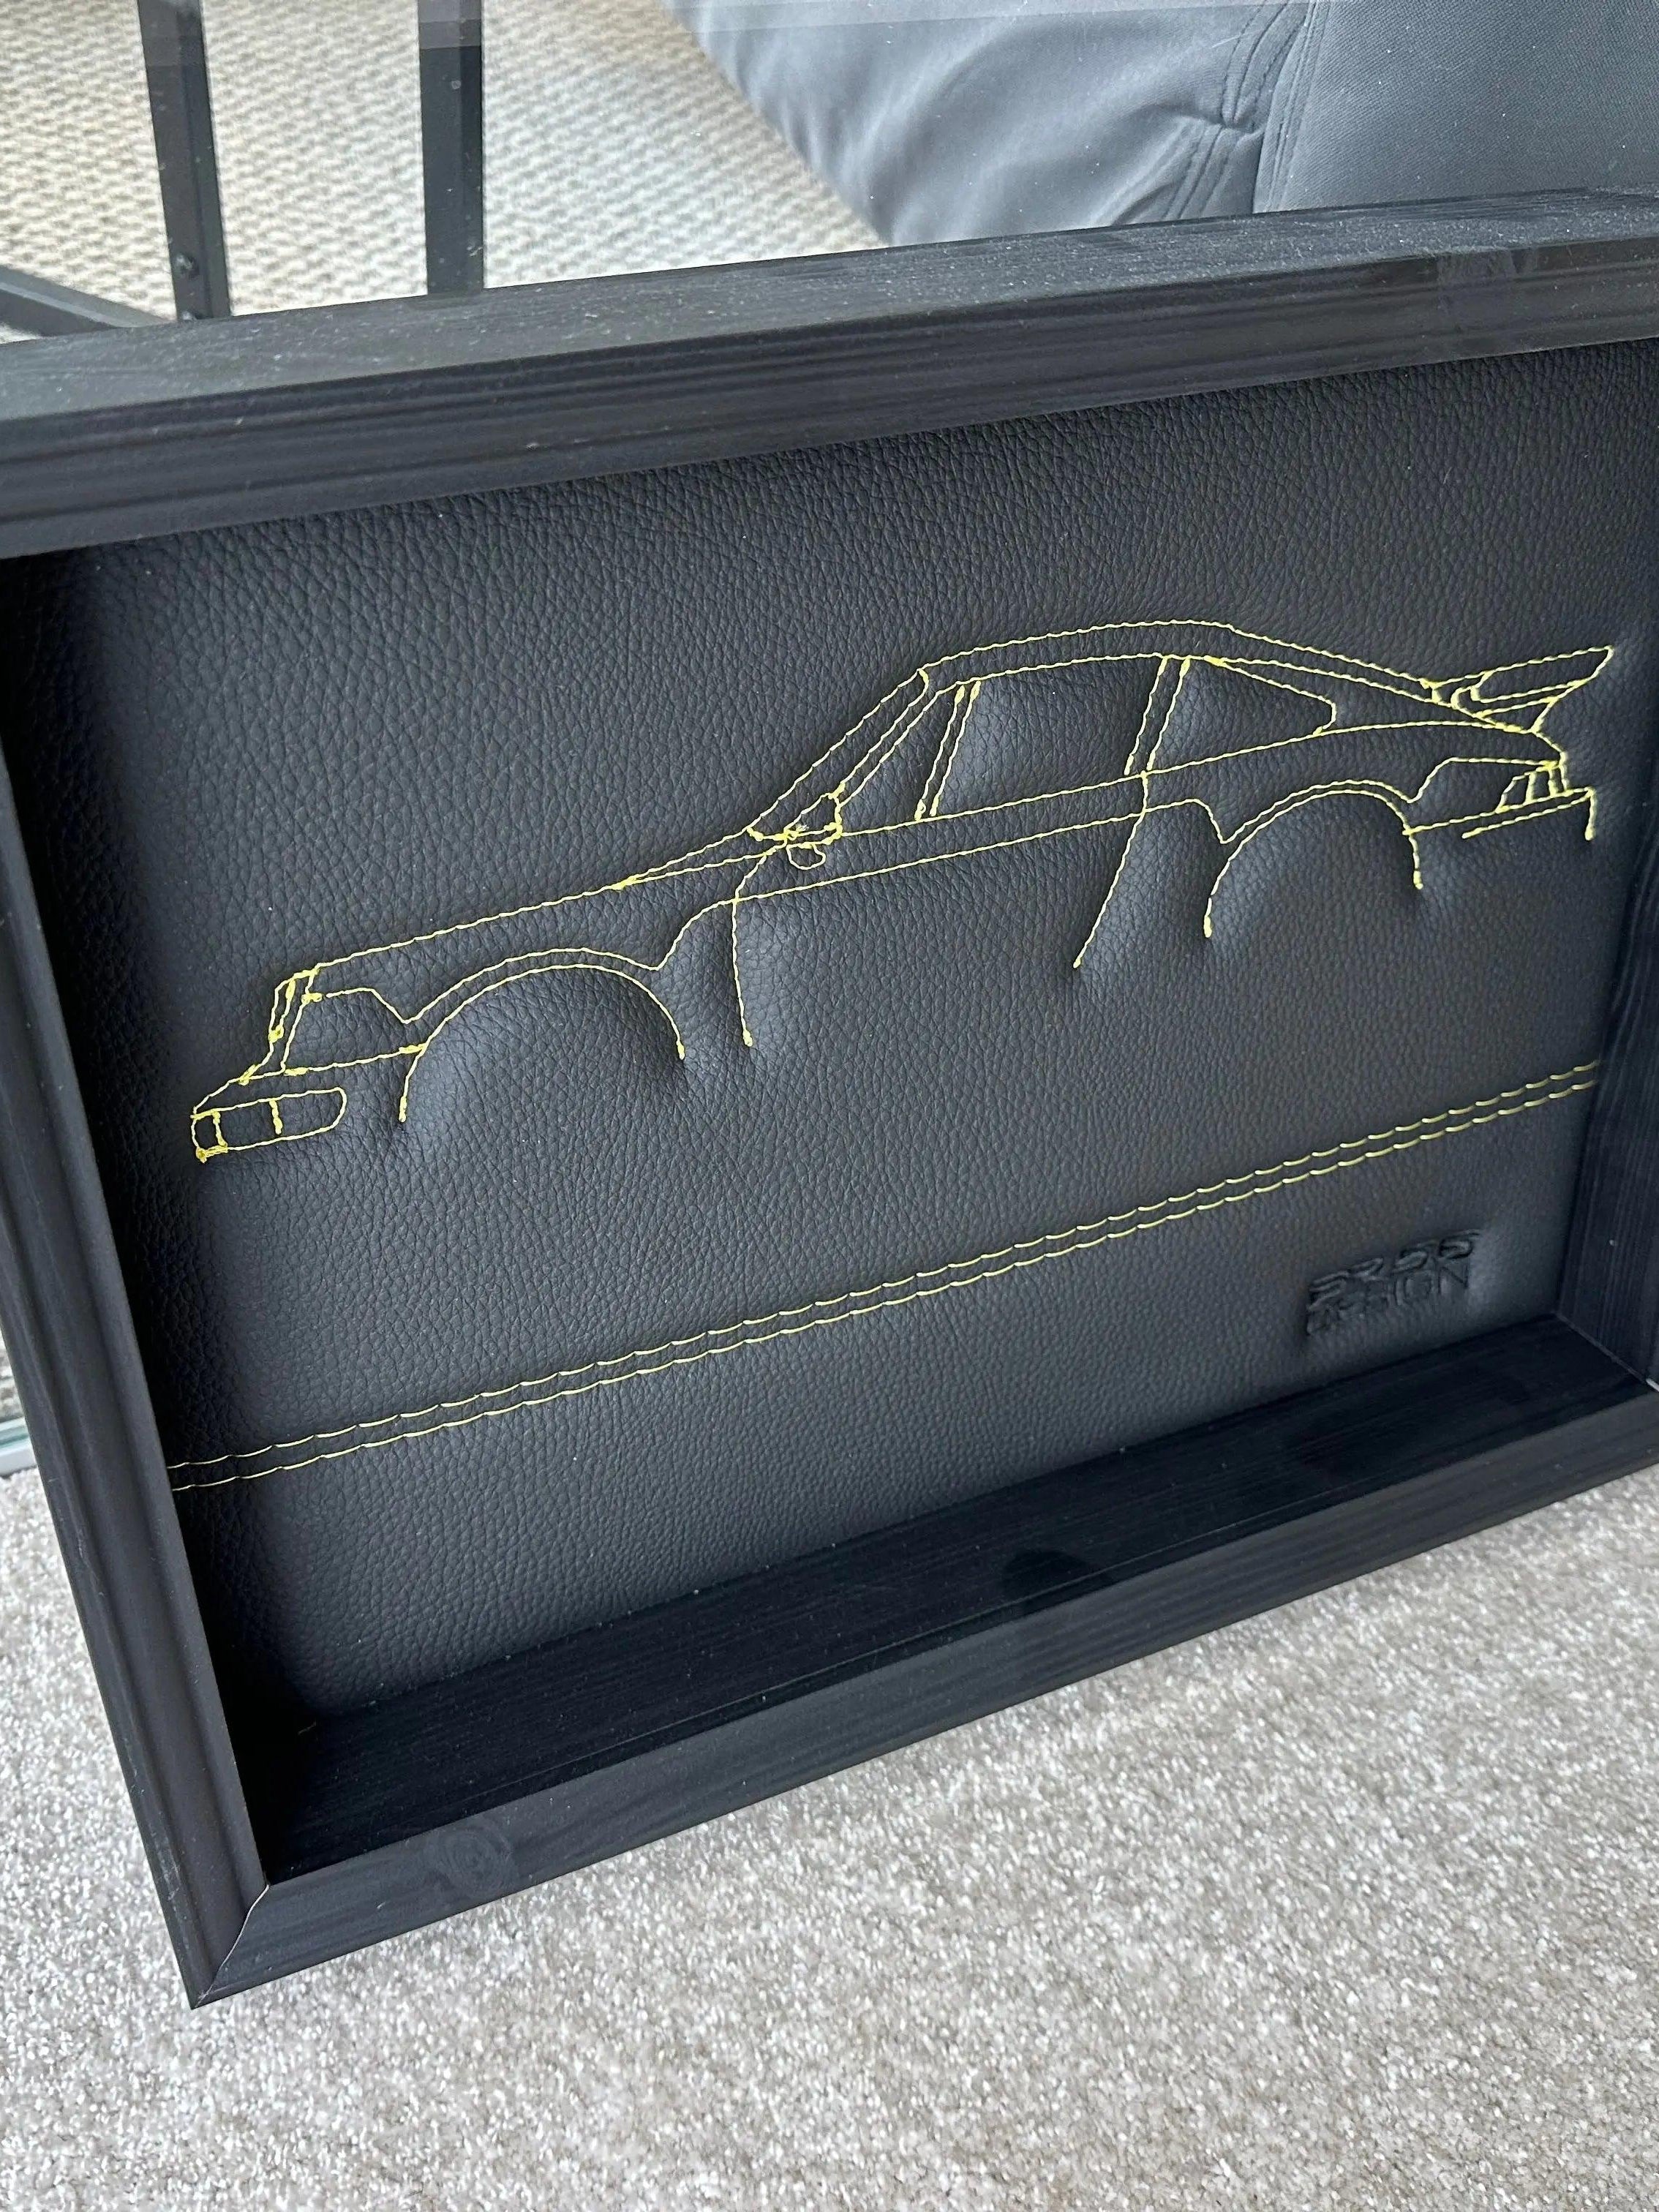 Black Leather Porsche 911 - 964 Inspired Wall Art: Embroidered Yellow Stitch Luxury Decor